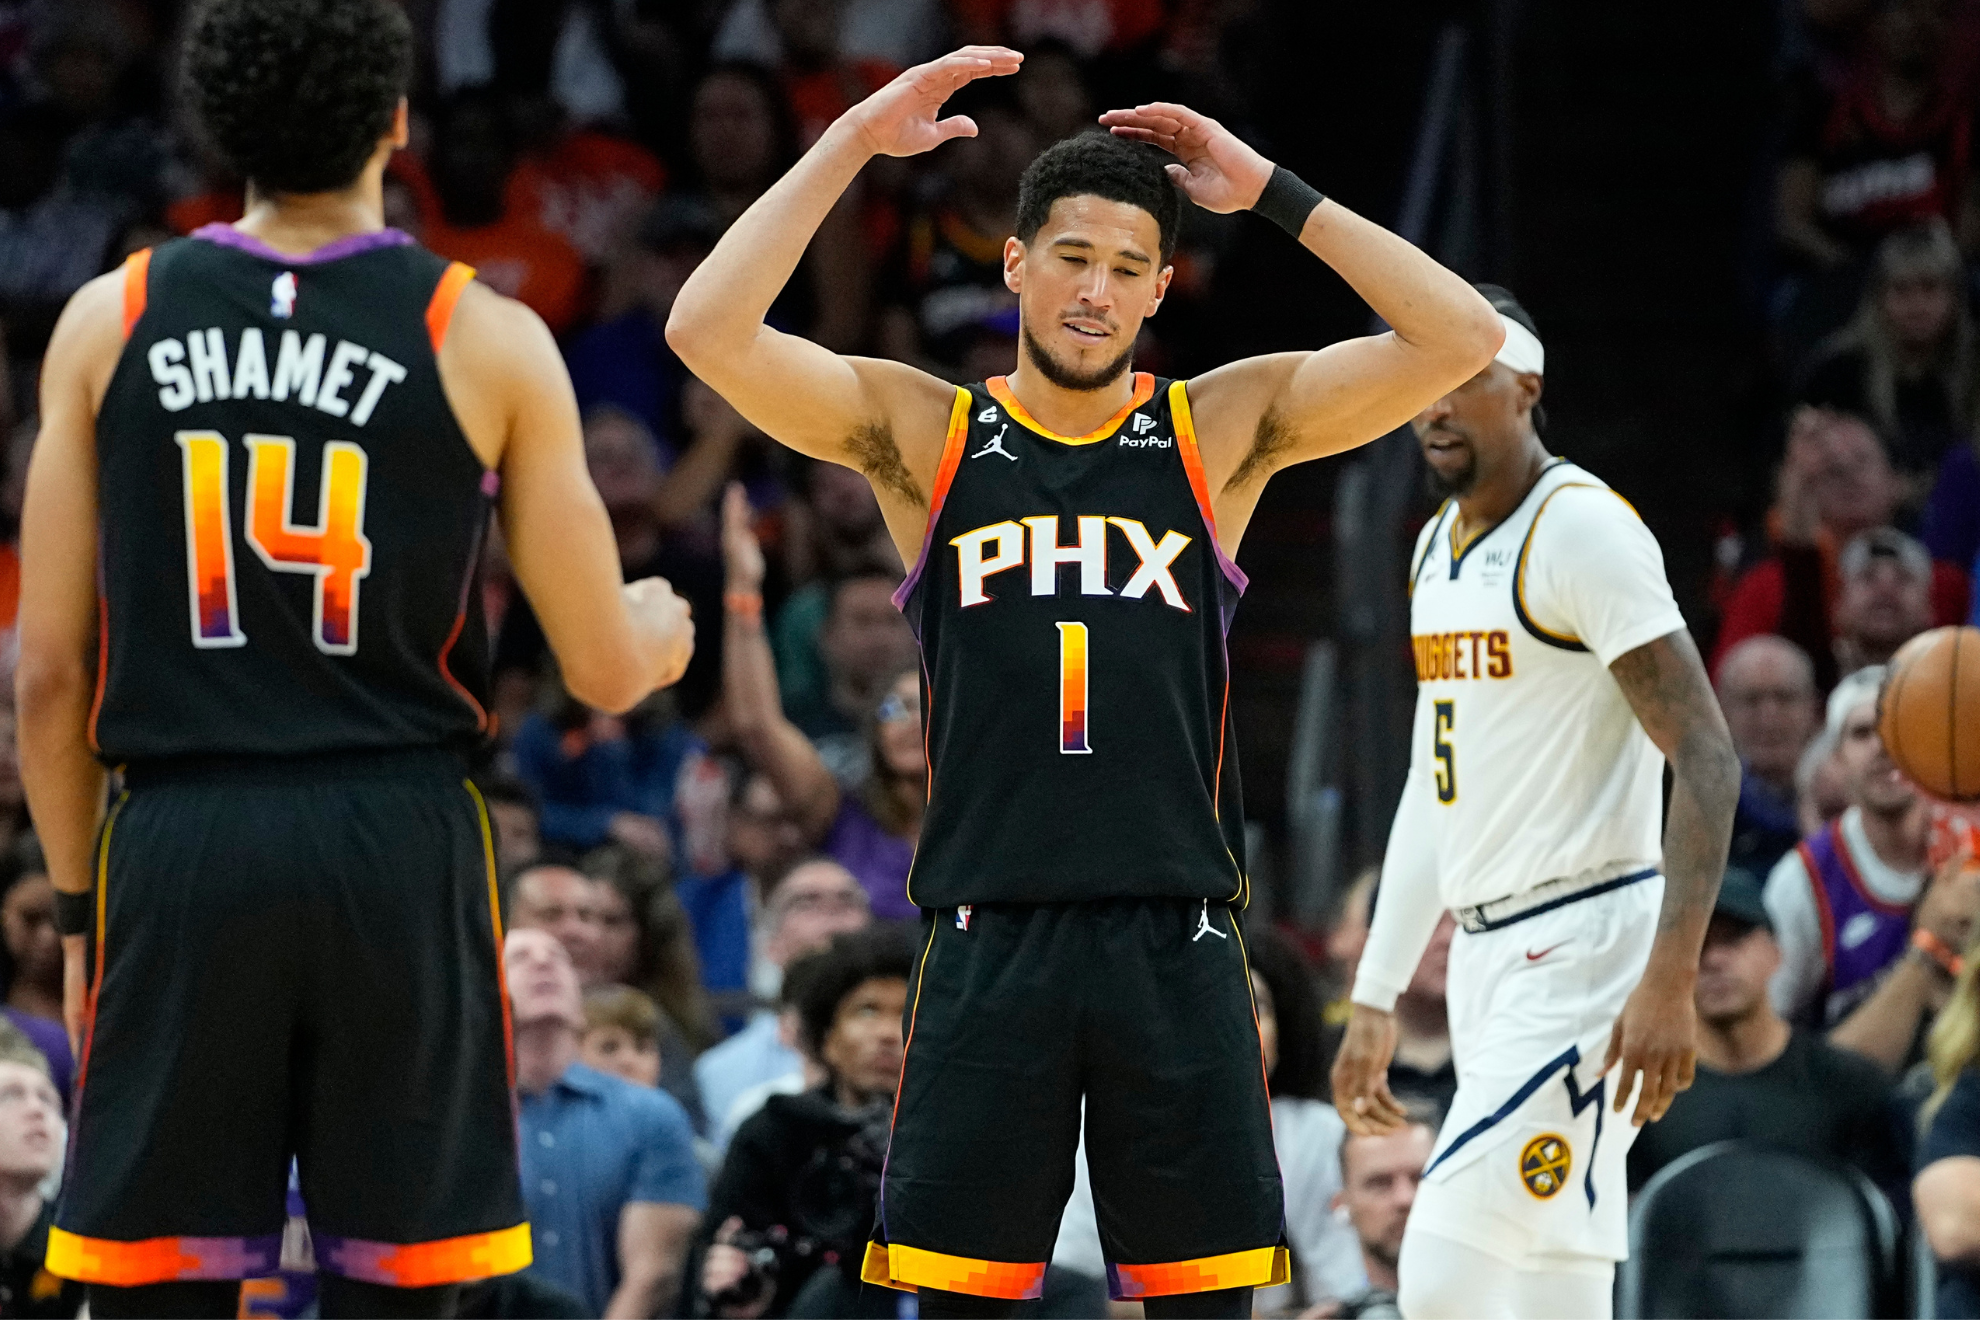 Booker and the Suns were embarrassed on their home floor again.